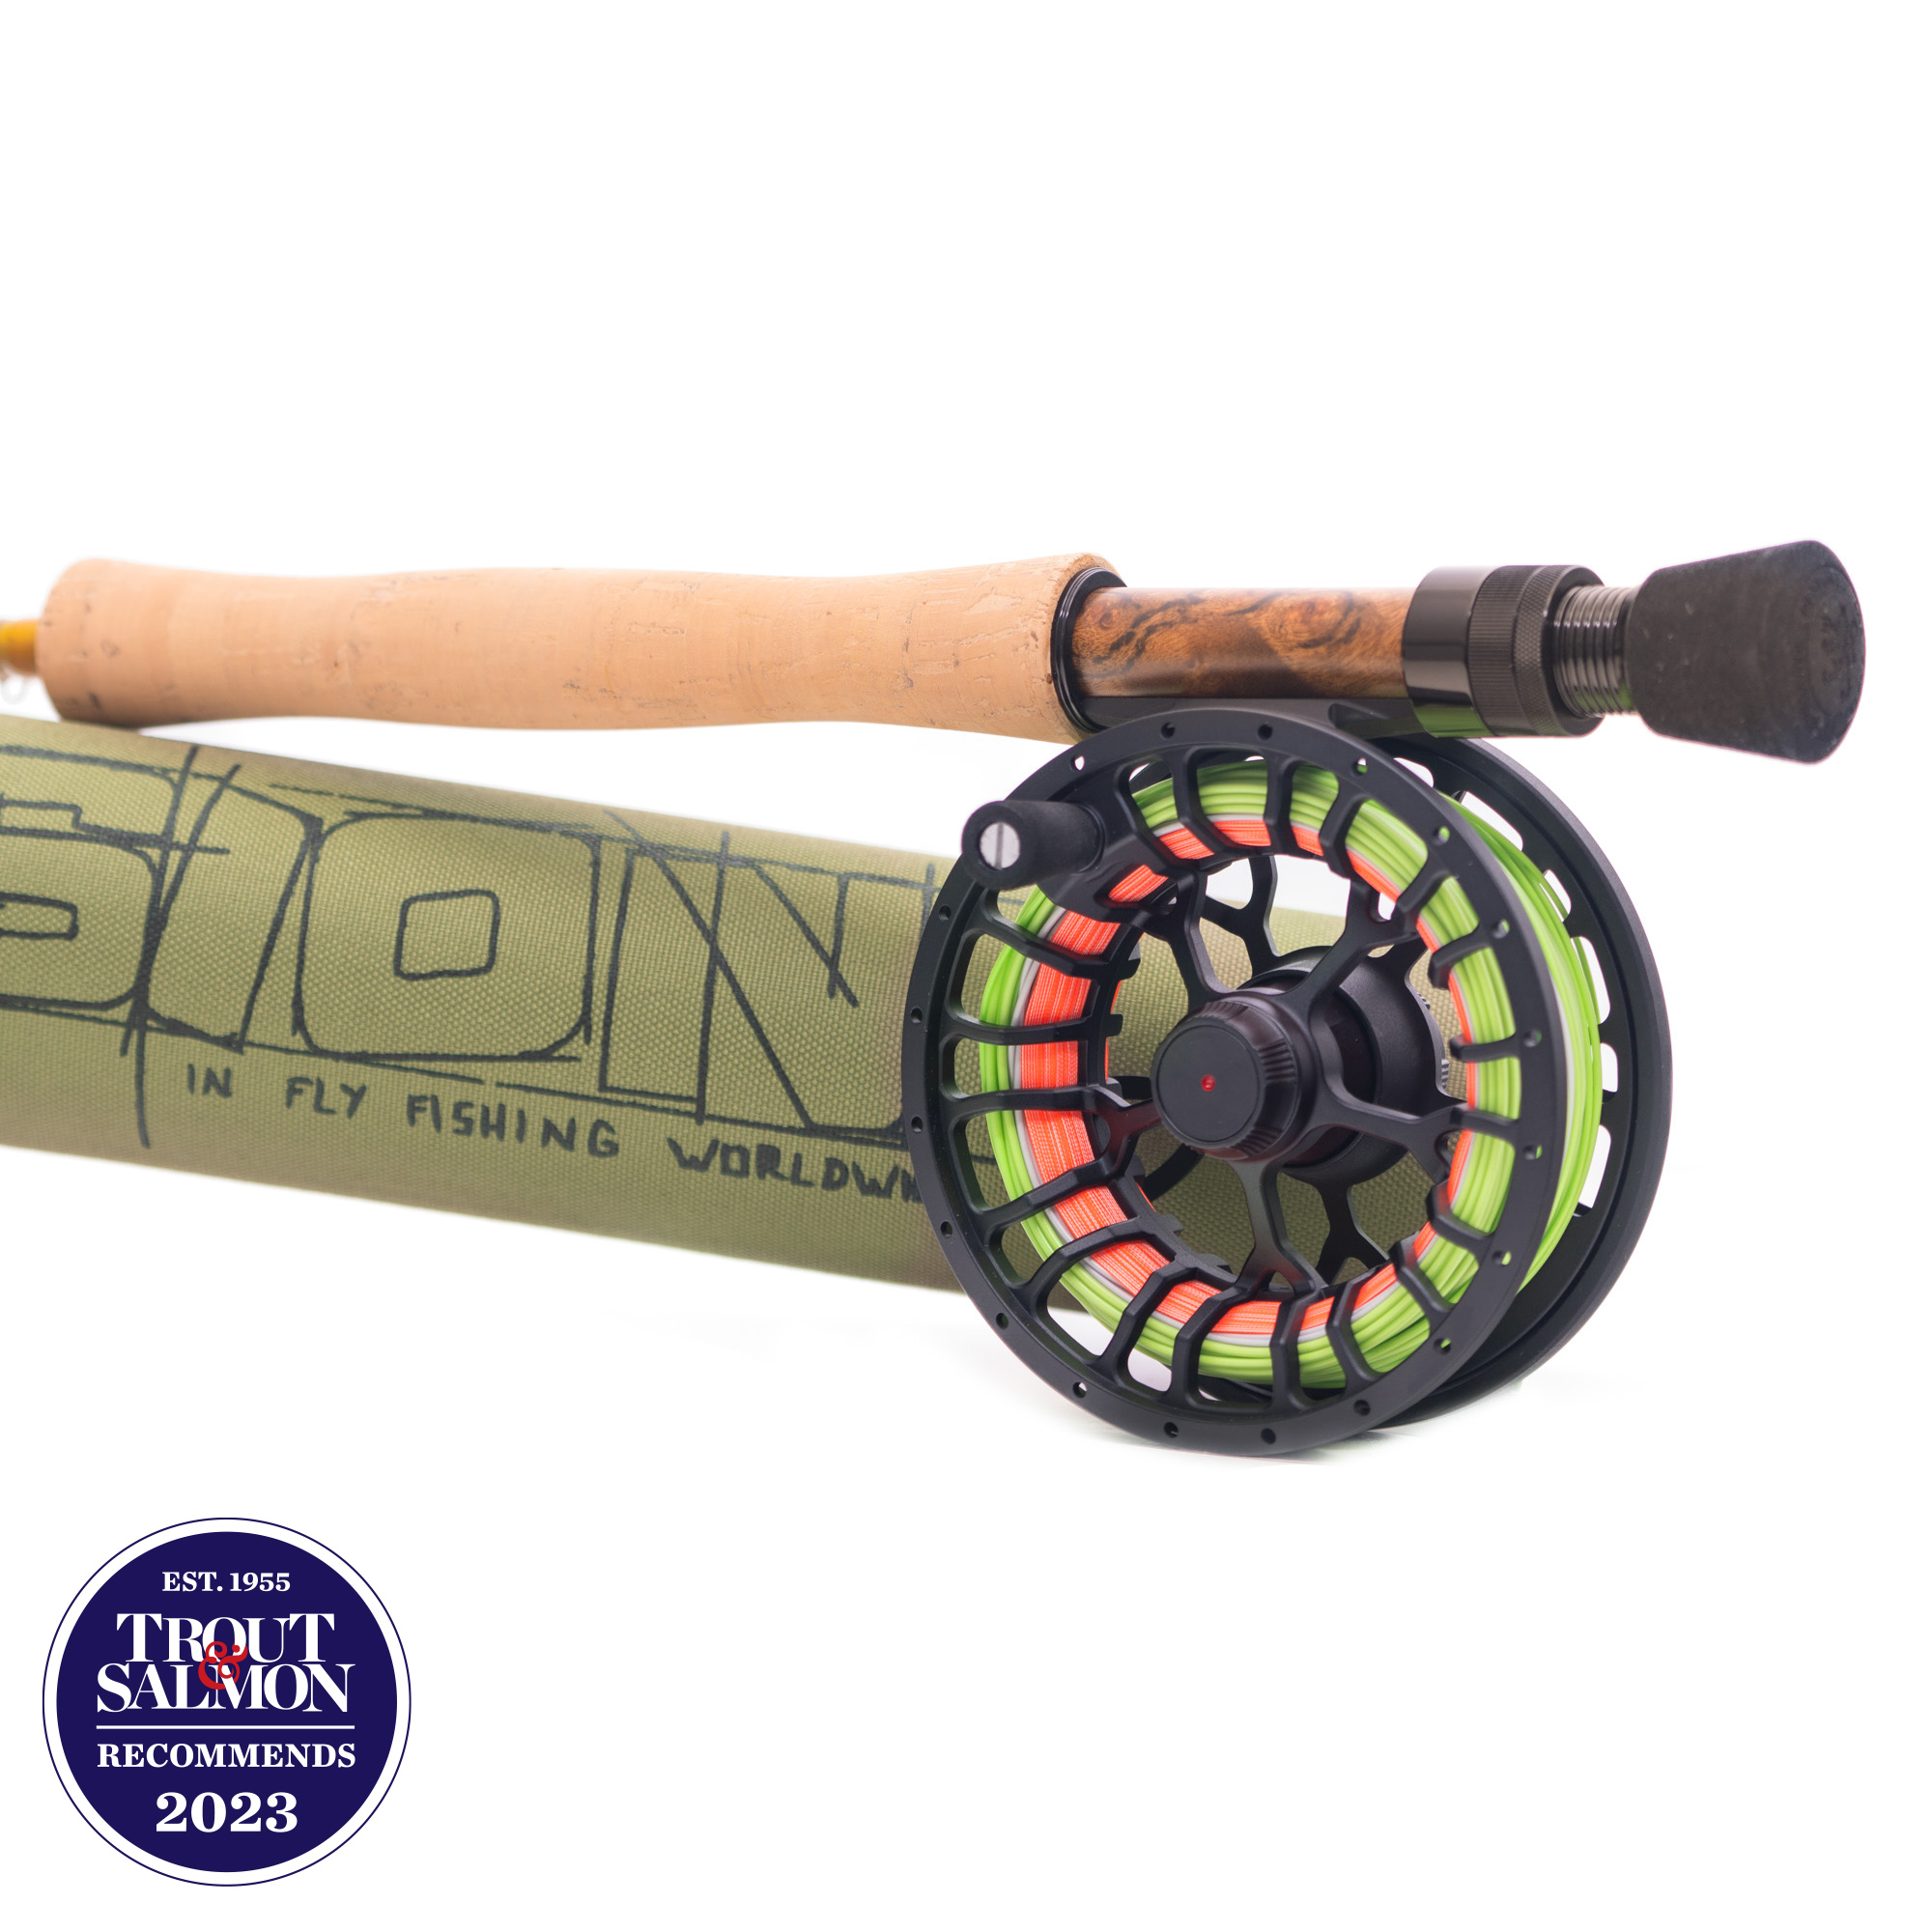 Vision Still Hero Outfit – Guide Flyfishing, Fly Fishing Rods, Reels, Sage, Redington, RIO